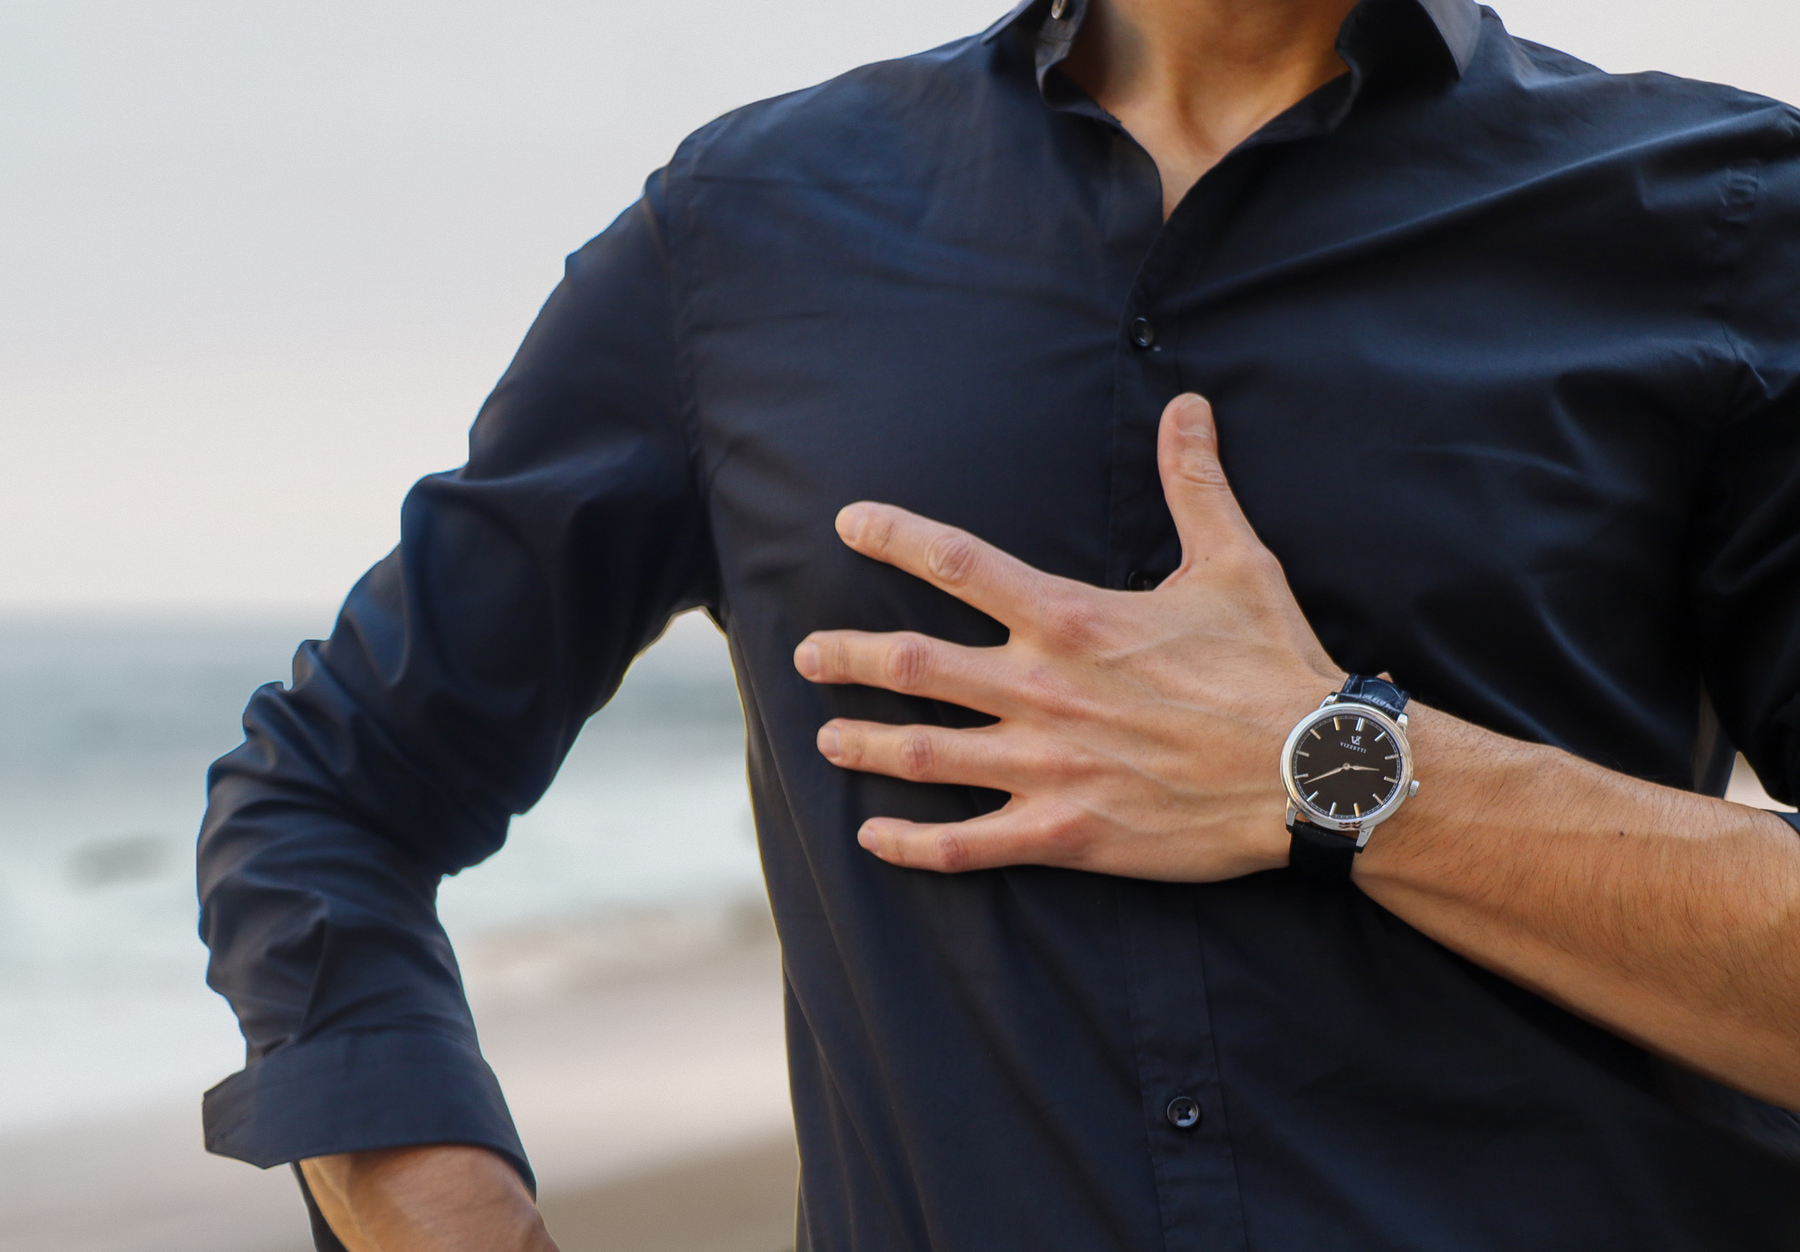 A male model poses on the beach, displaying his Vizzetti watch on his wrist.